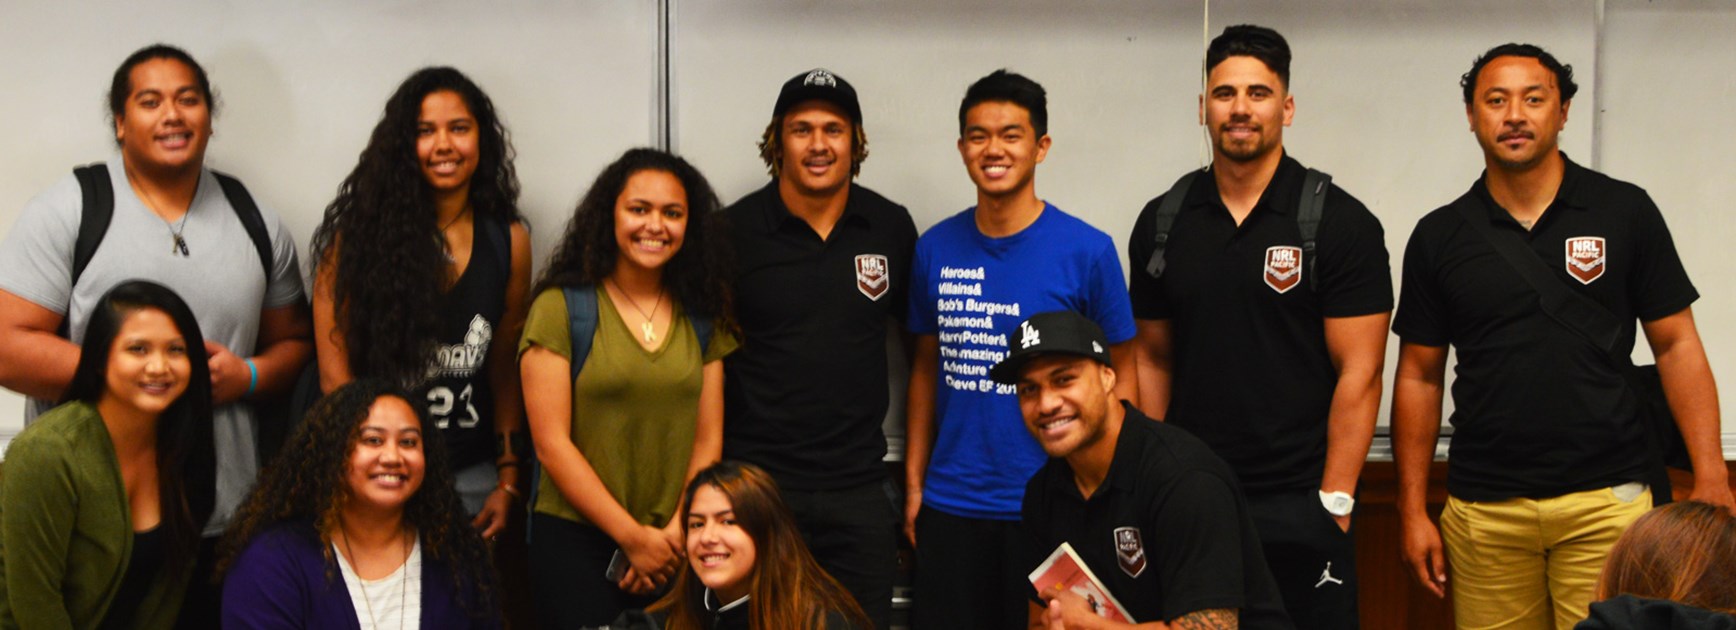 NRL Education and Wellbeing Manager Nigel Vagana led a trip for Four Indigenous and Pasifika NRL players to the USA and UCLA.